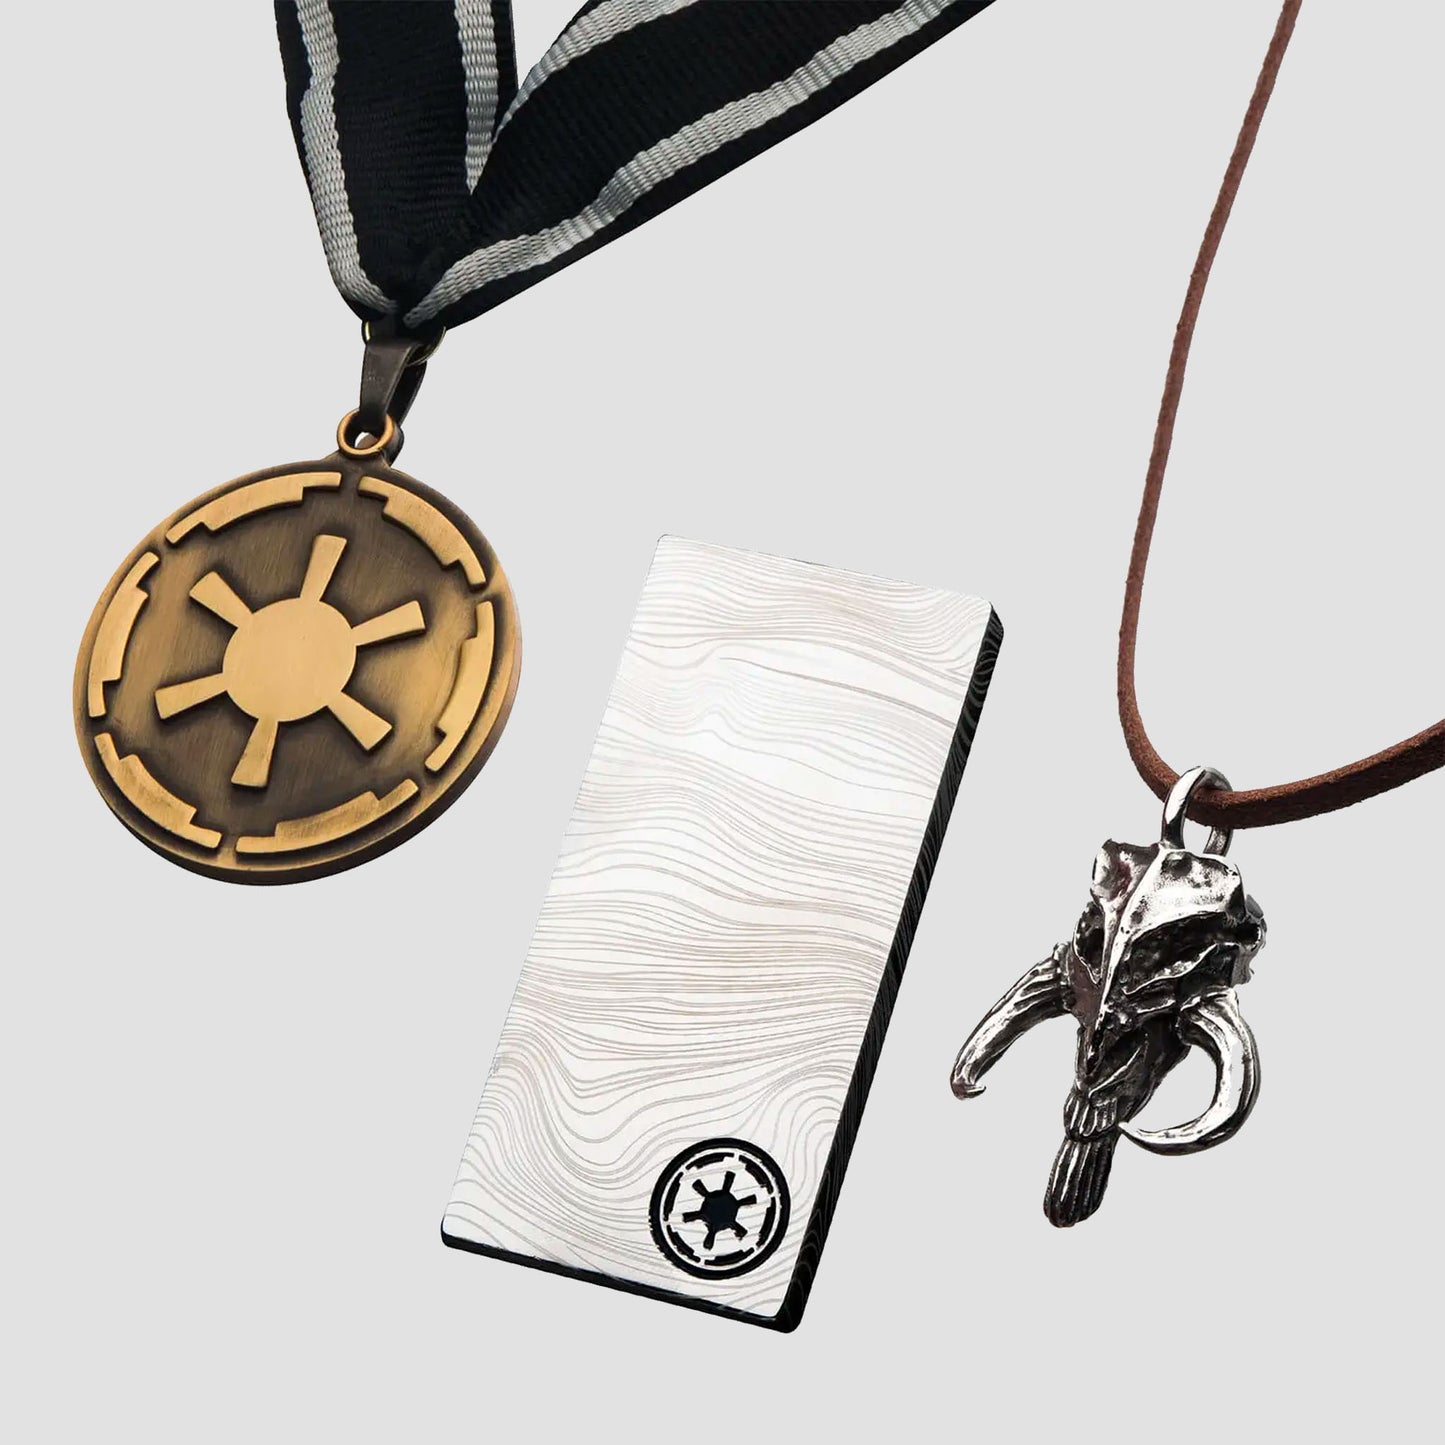 Star Wars: The Mandalorian Medallion, Necklace, and Pin Prop Replica Set